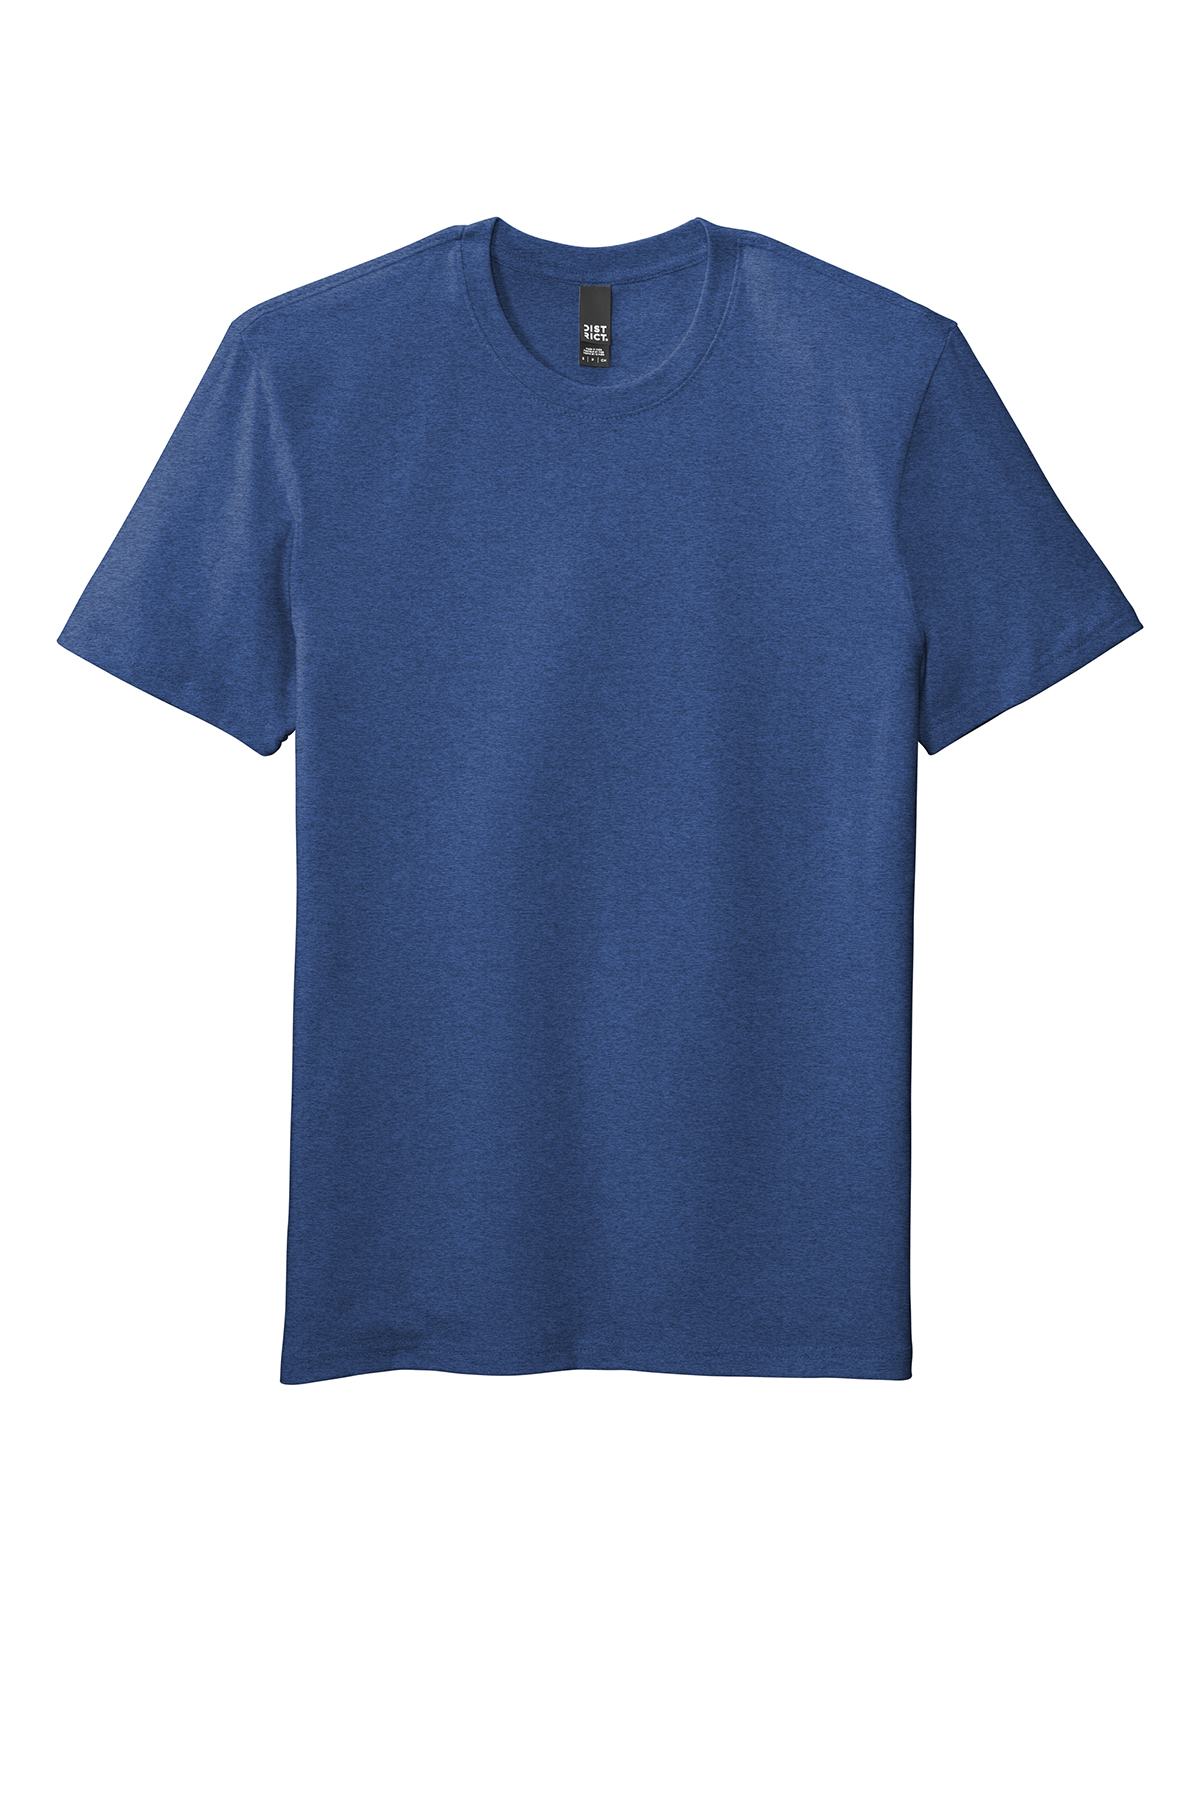 click to view Heather Deep Royal